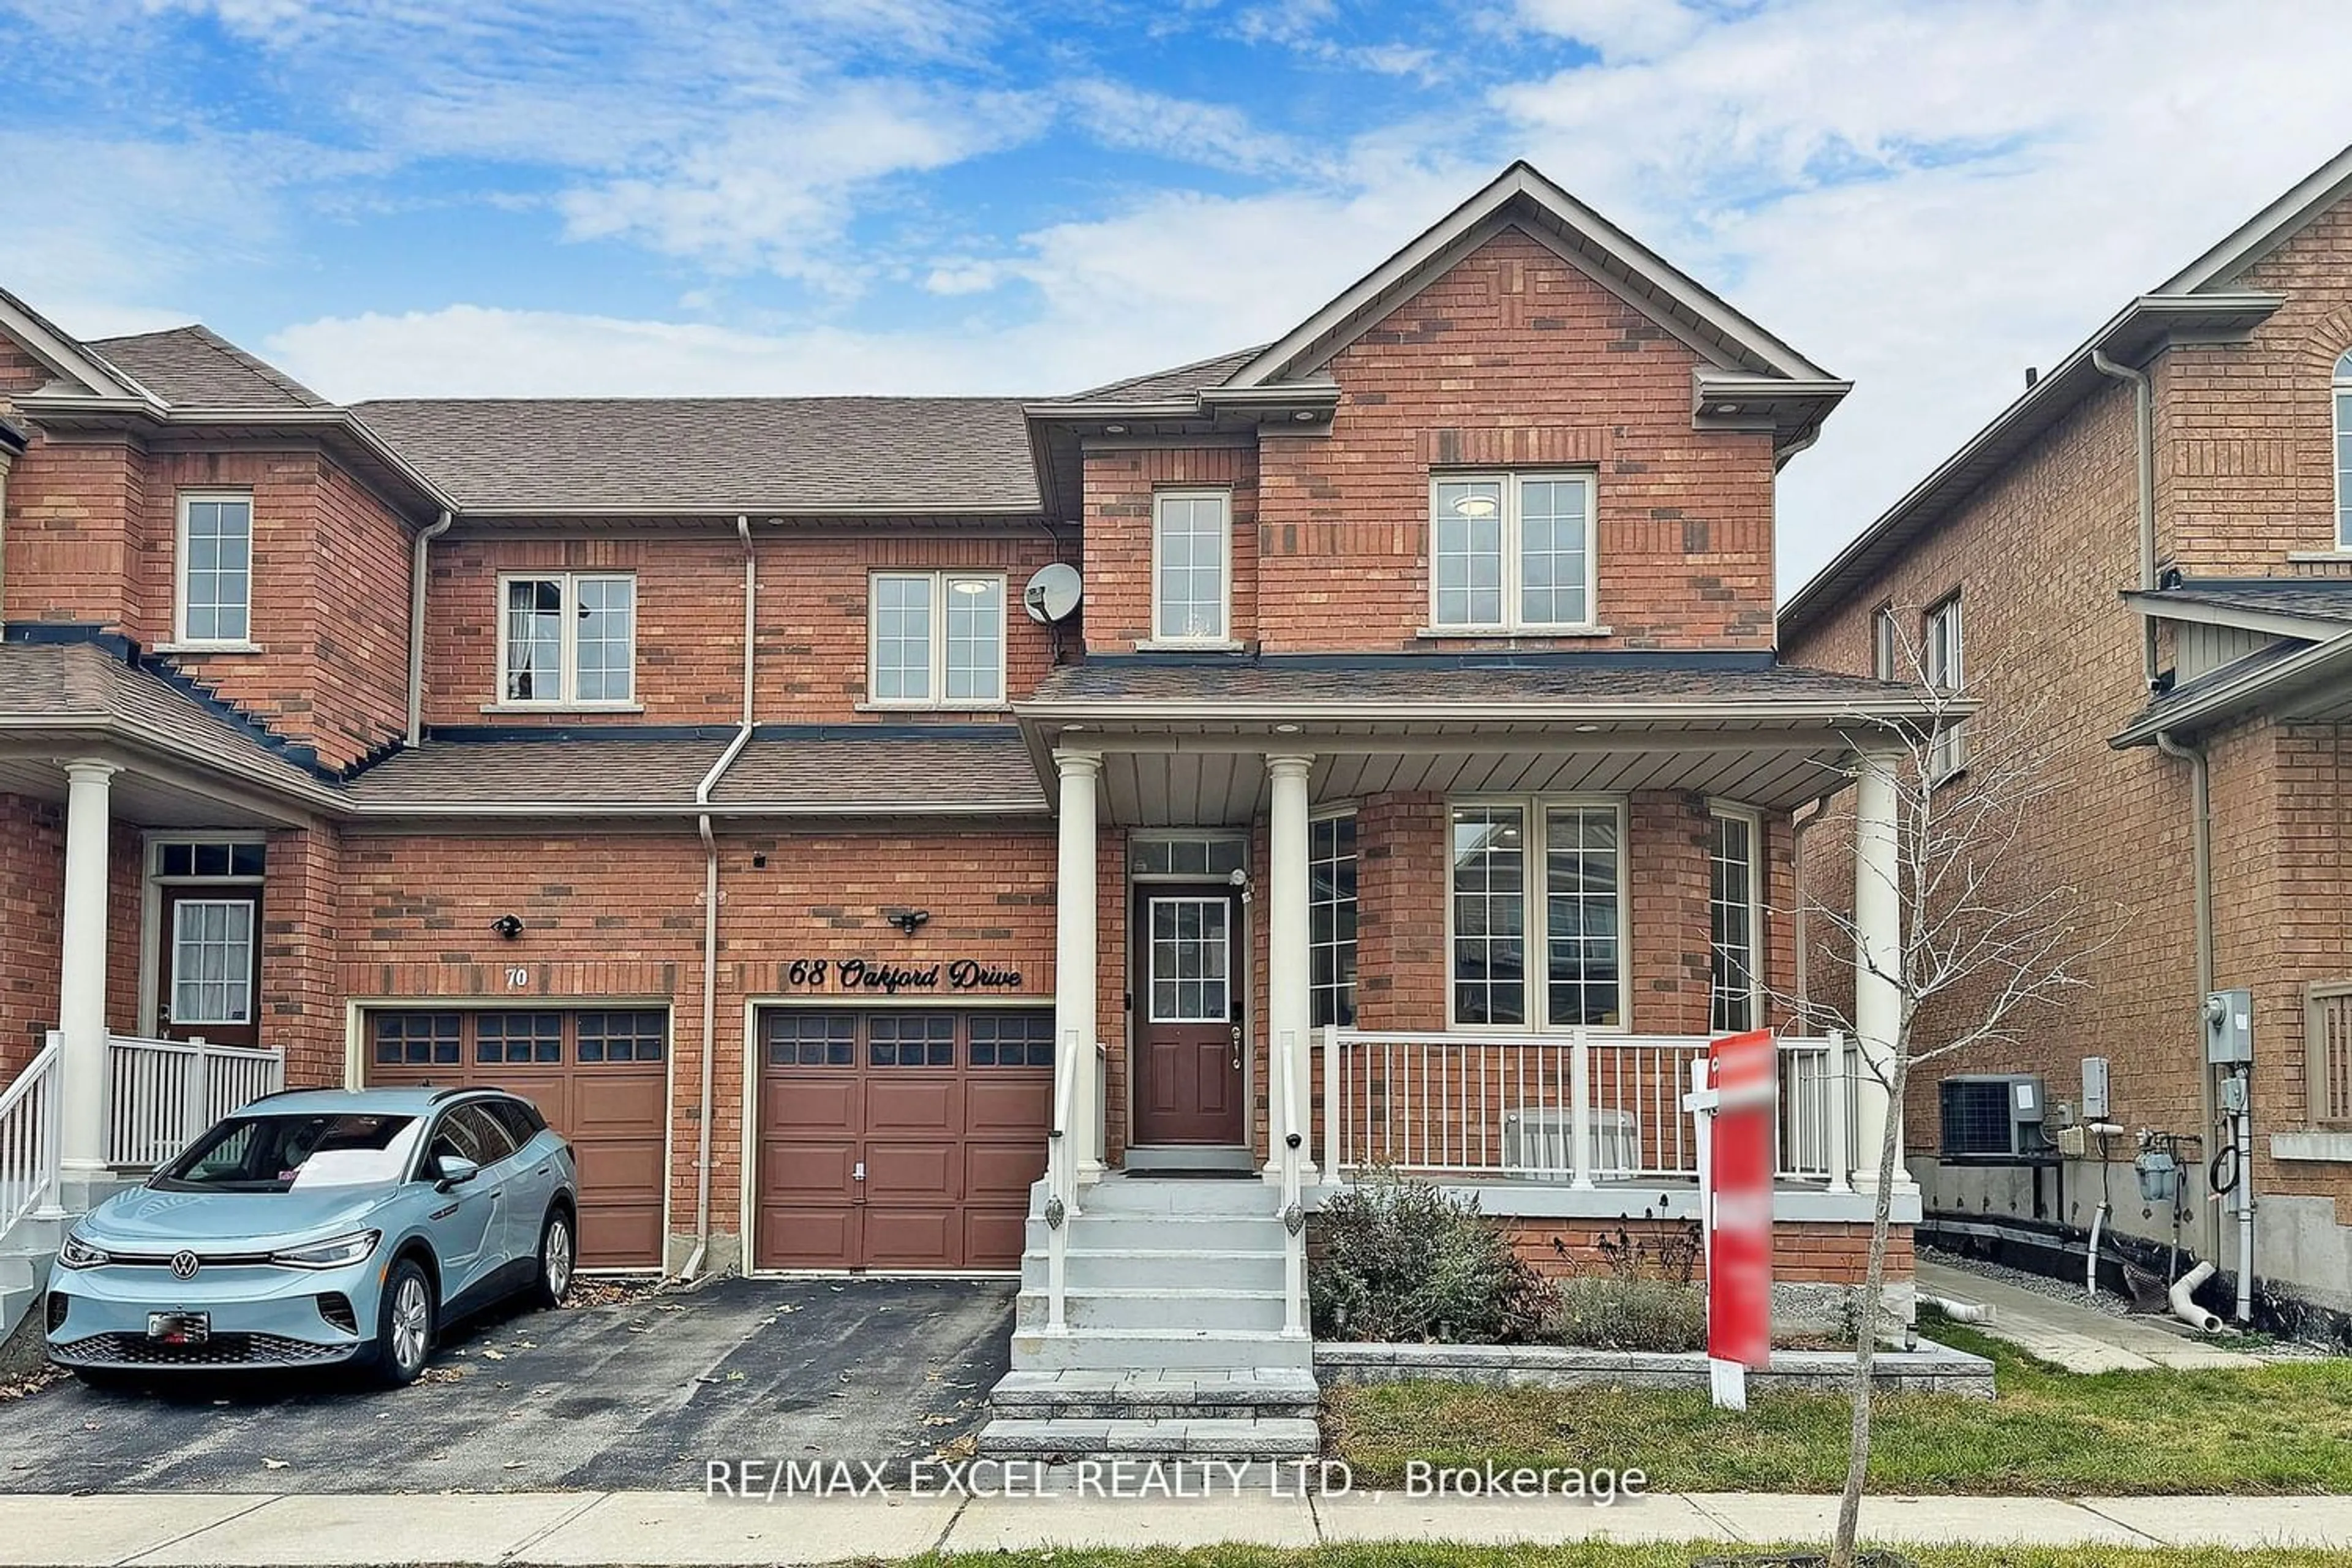 Home with brick exterior material for 68 Oakford Dr, Markham Ontario L6C 2Y8